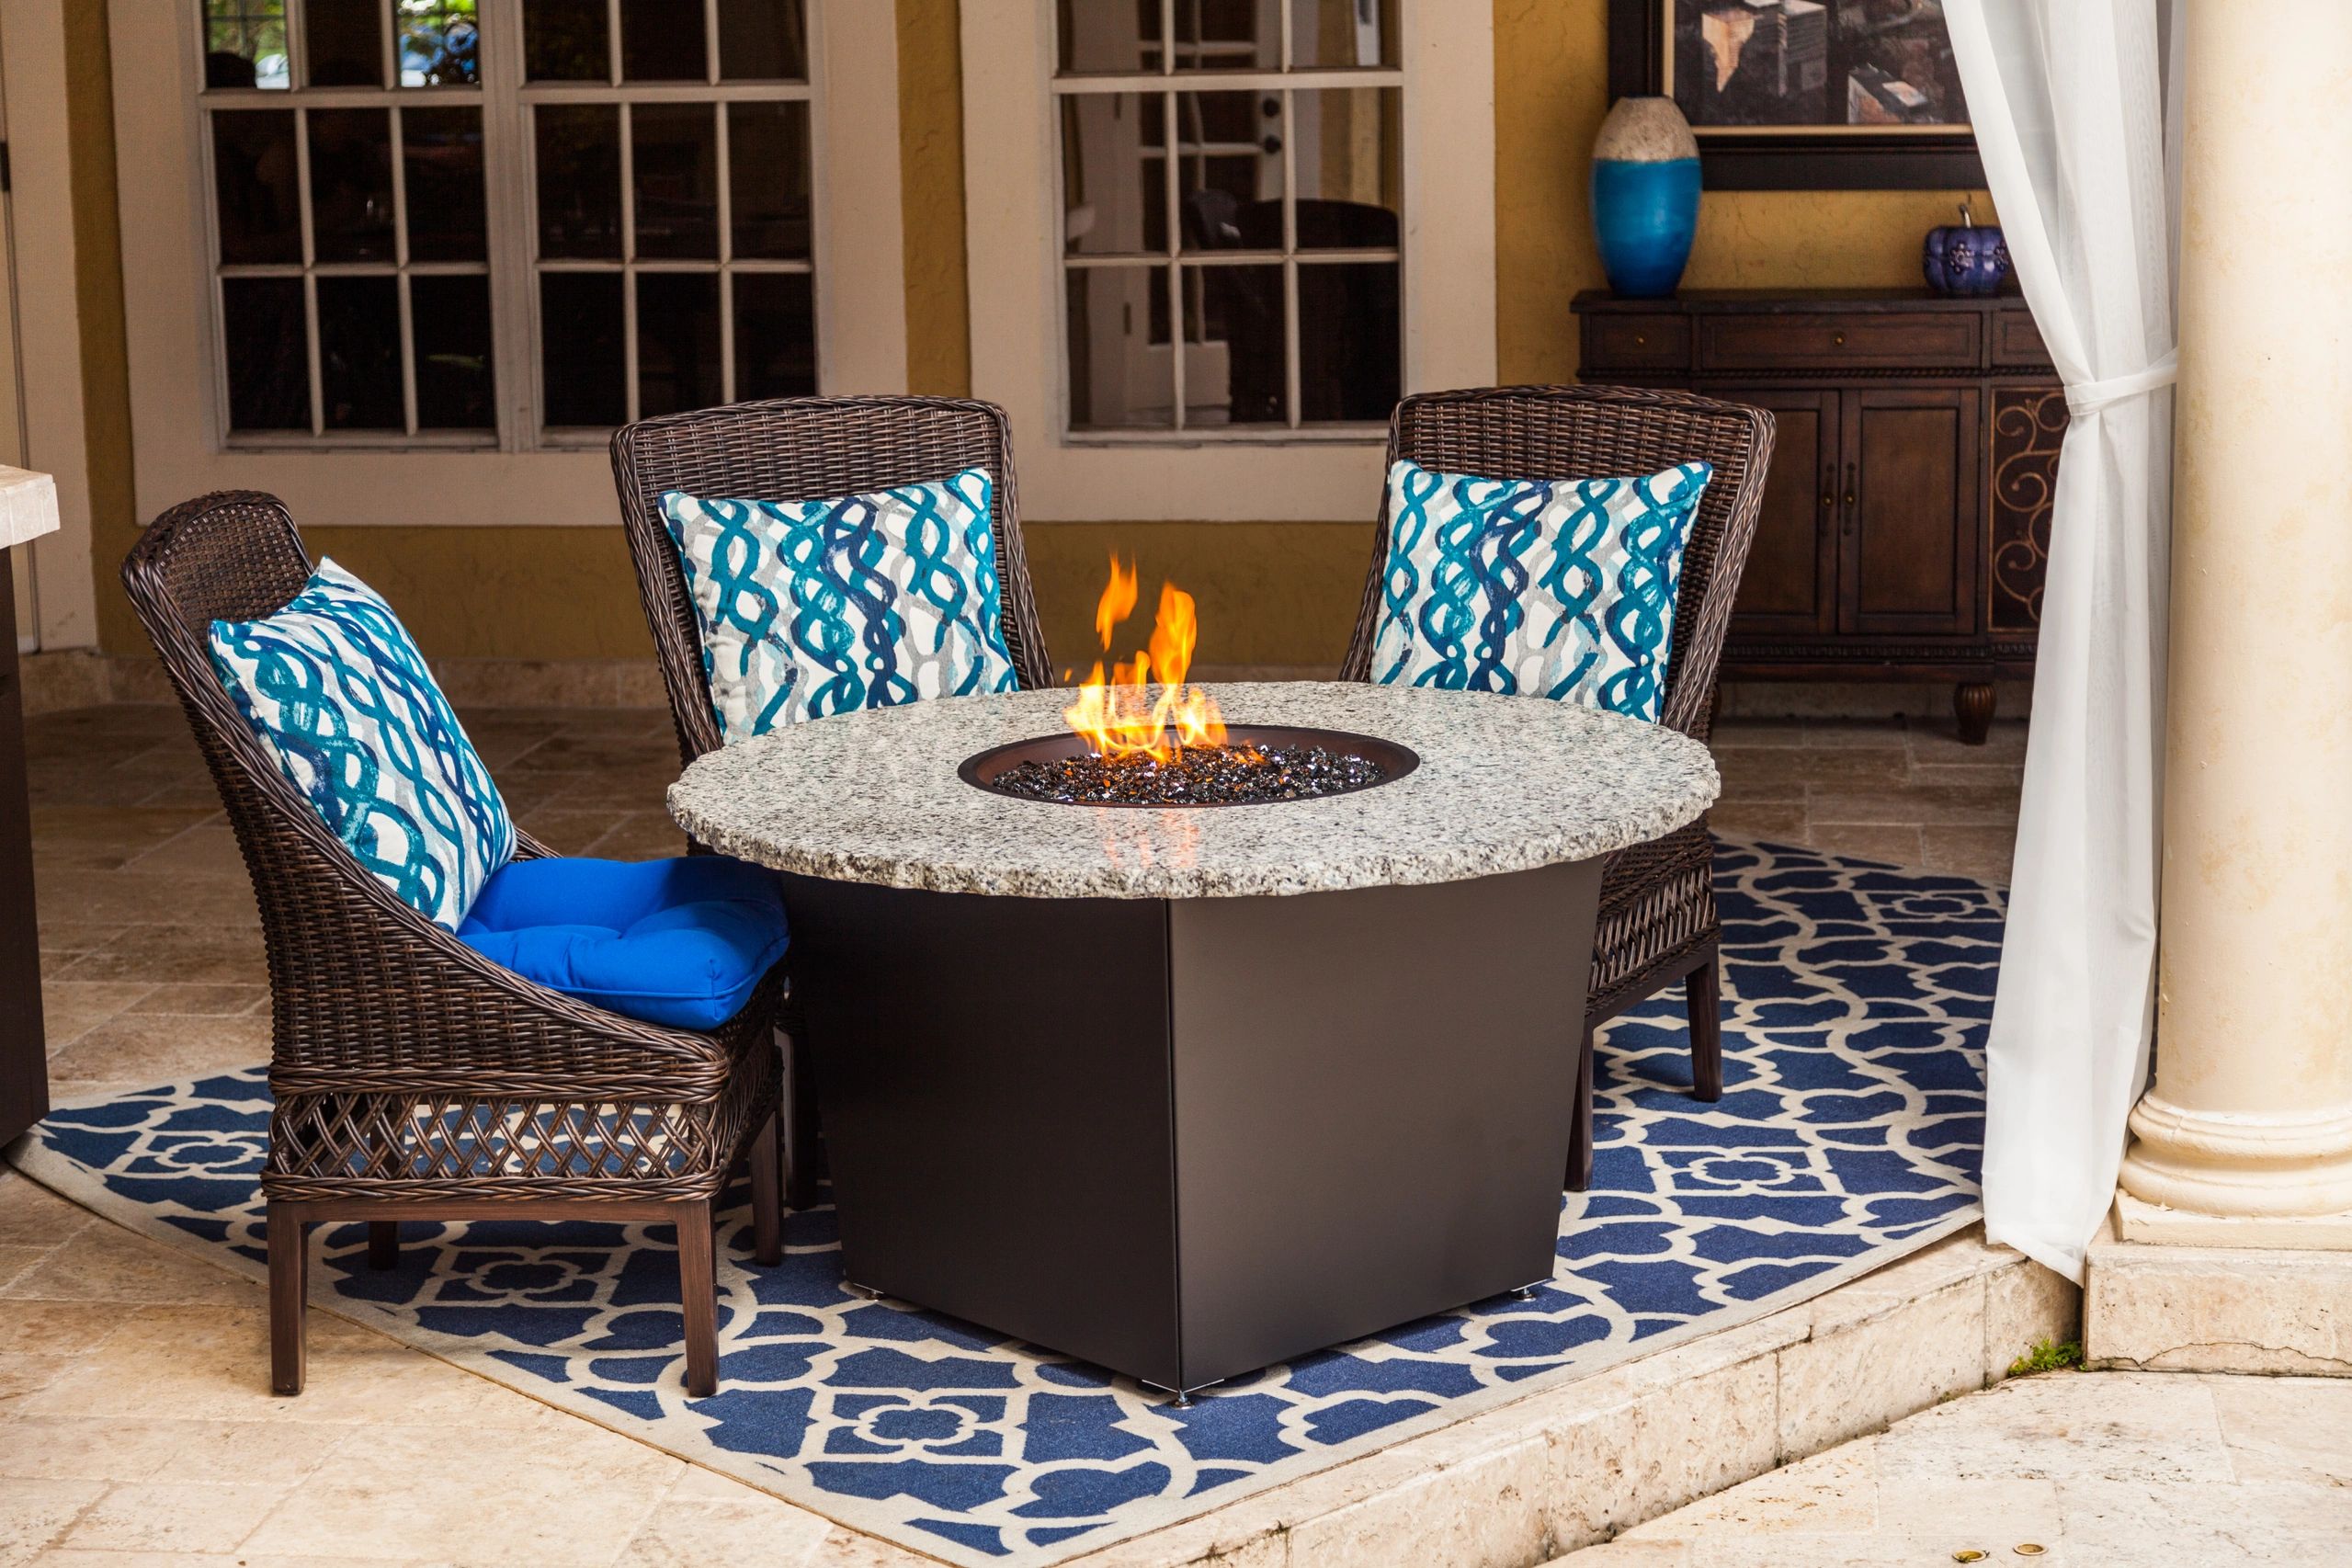 Fire table burning on an outdoor patio